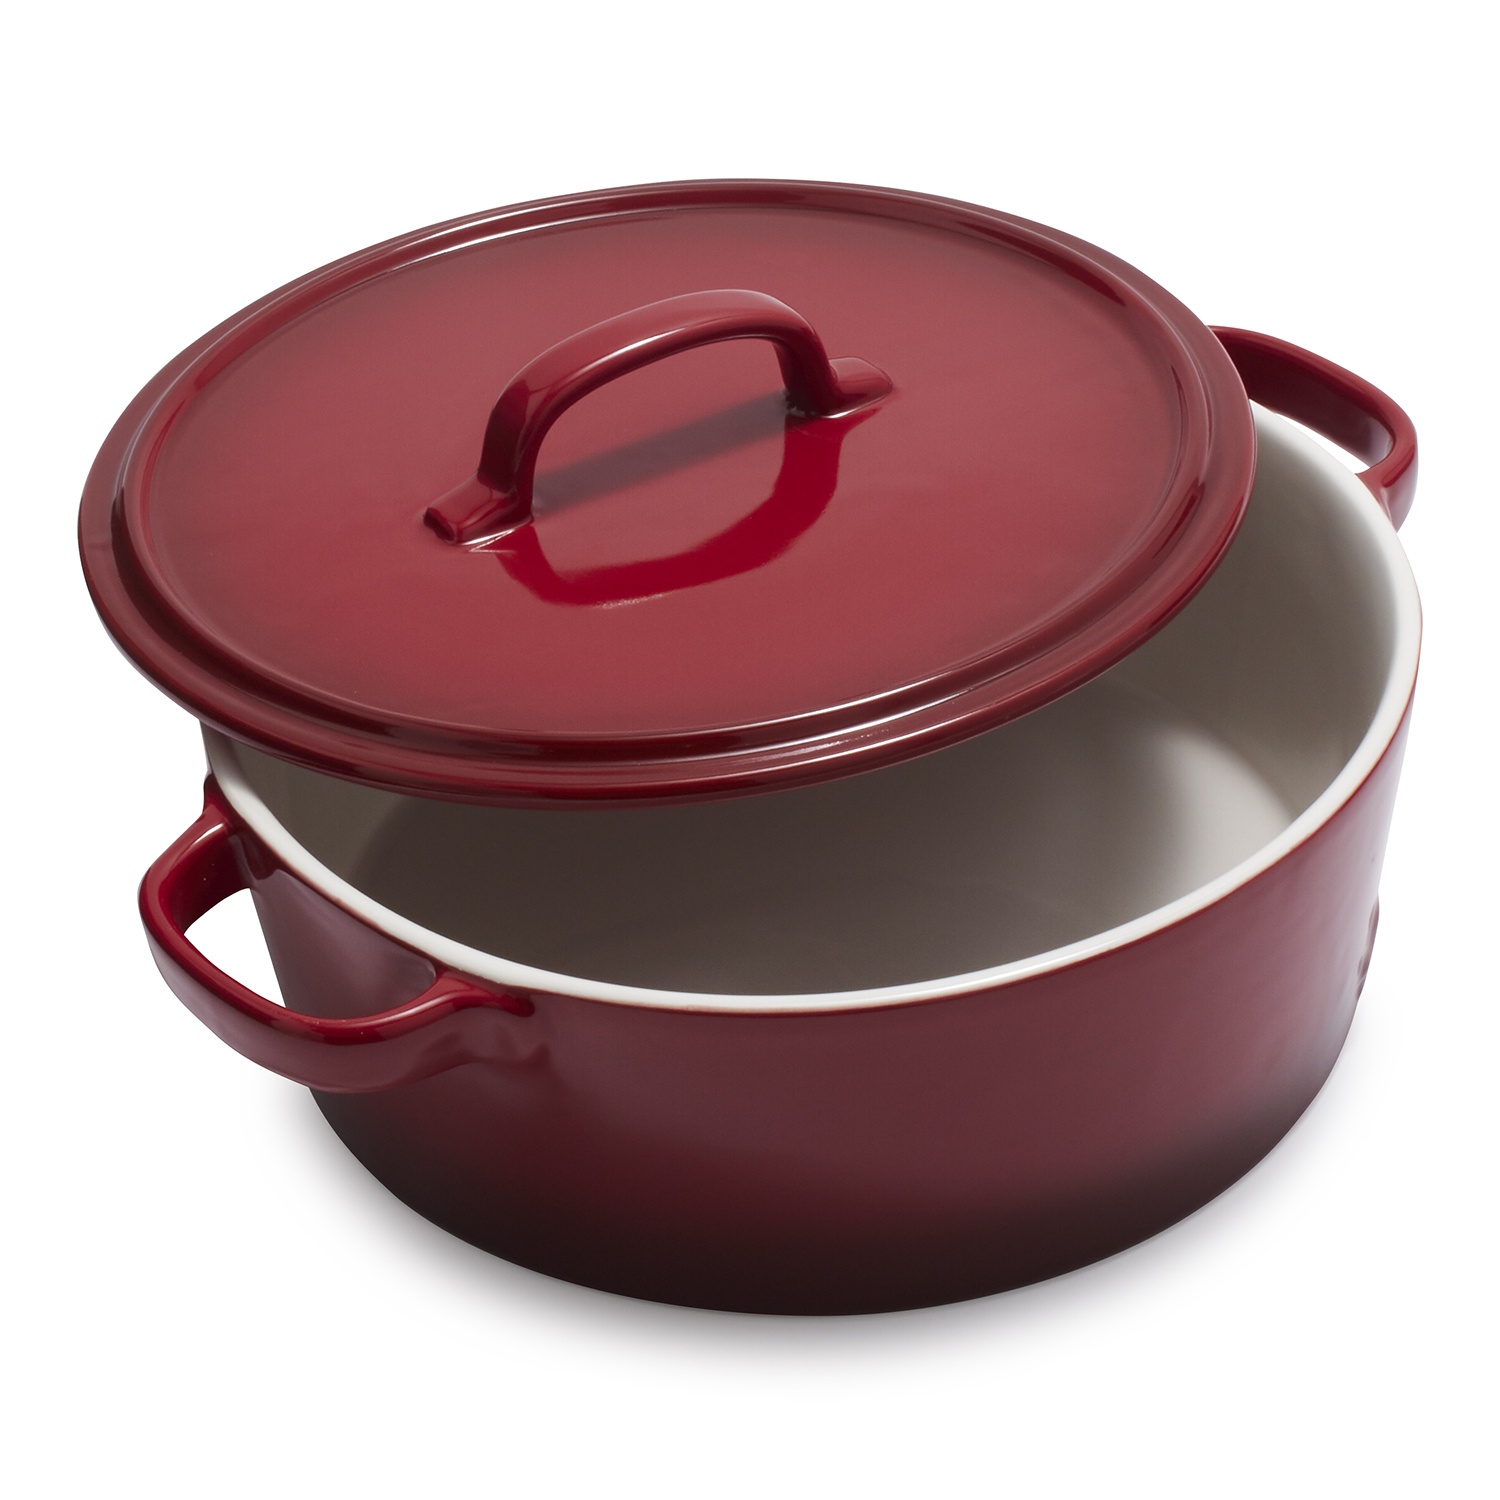 slide 1 of 1, La Marque 84 Oven to Table Round Casserole with Lid, Red, 4.5 qt